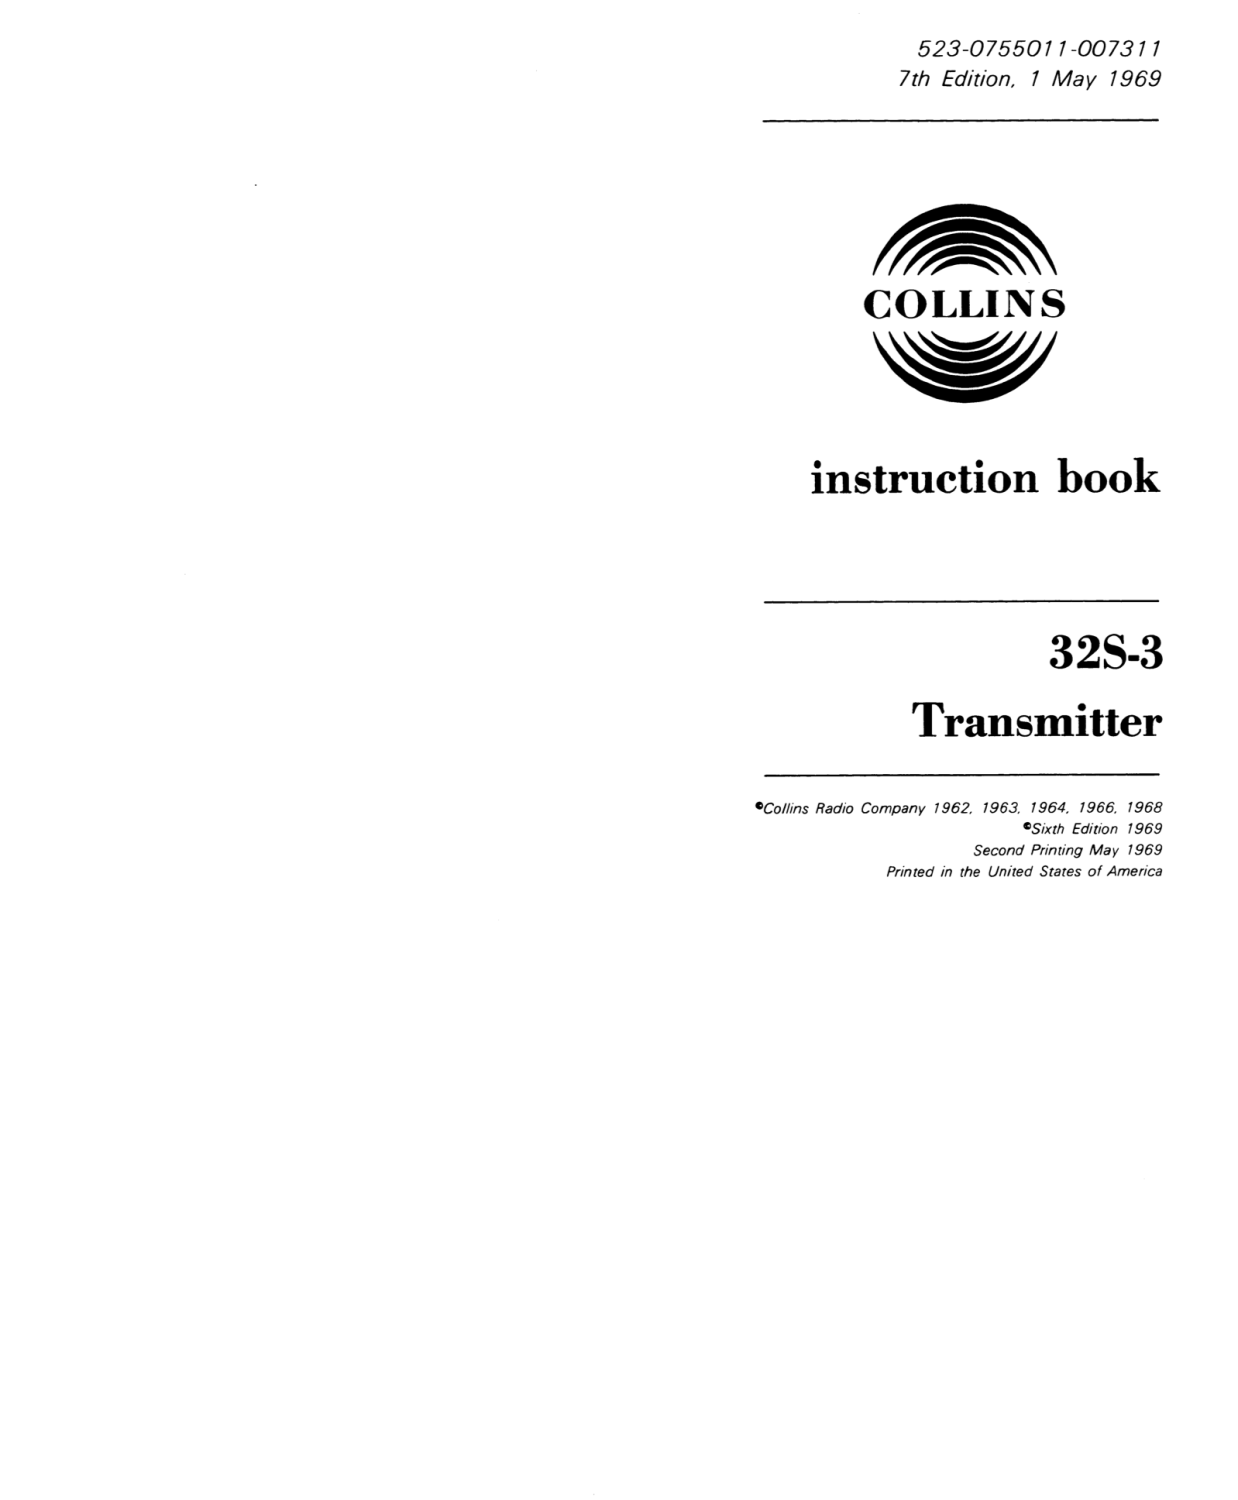 Collins 32S-3 S-Line Transmitter - Instruction Manual - 7th Edition - 1969-05